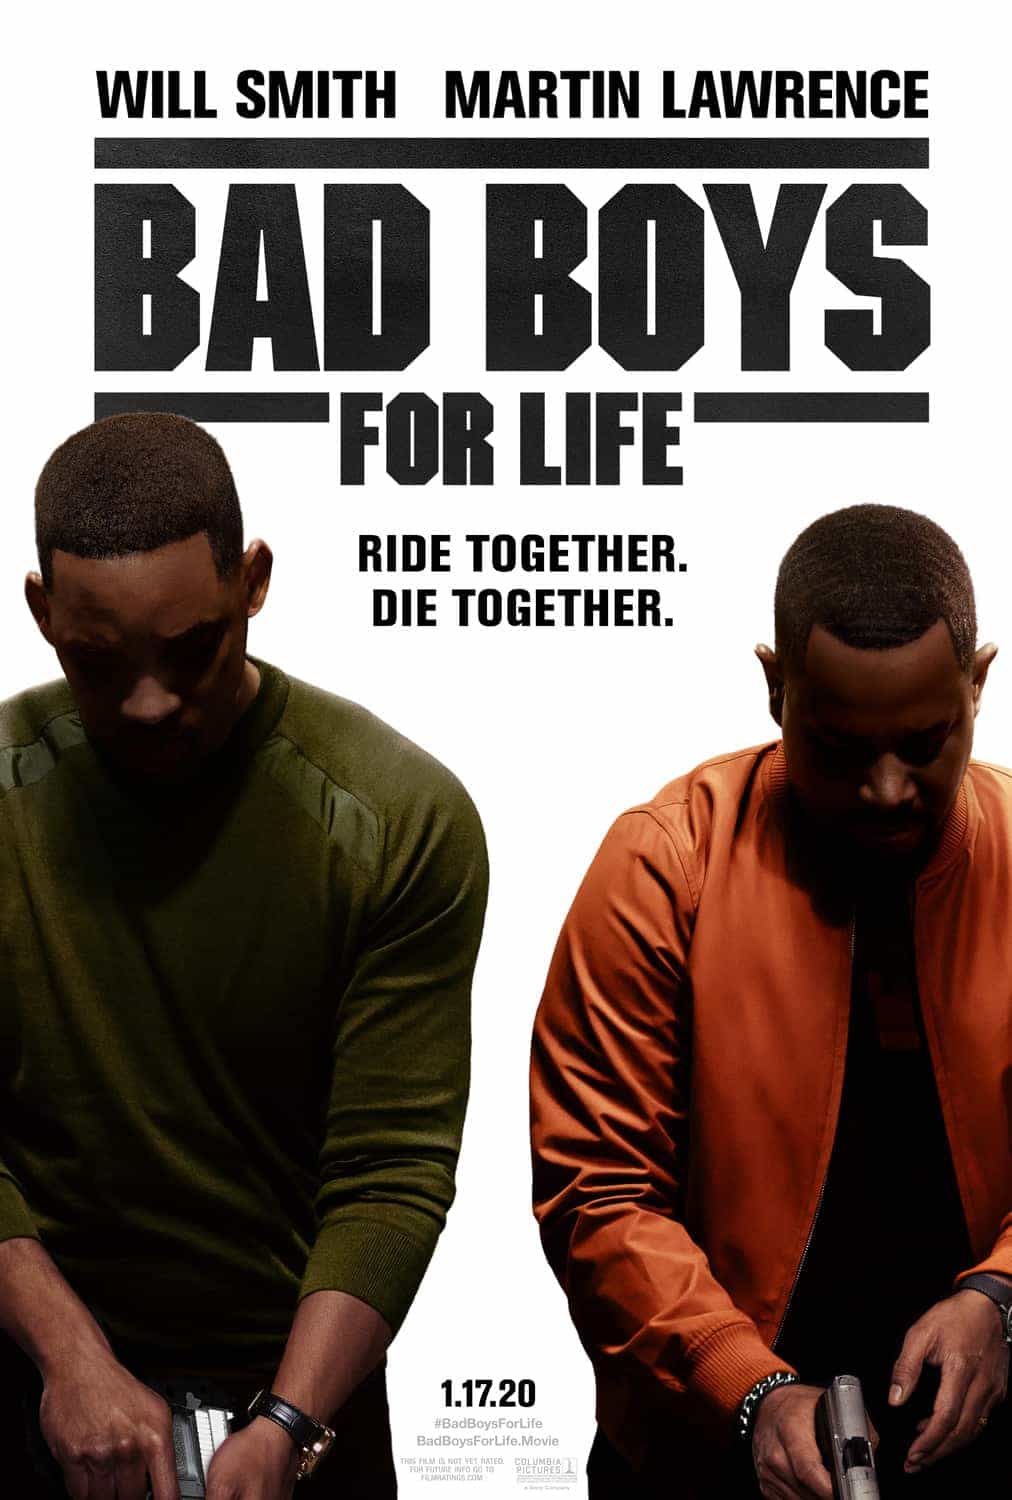 Martin Lawrence and Will Smith are together again in the new trailer for the third Bad Boys movie